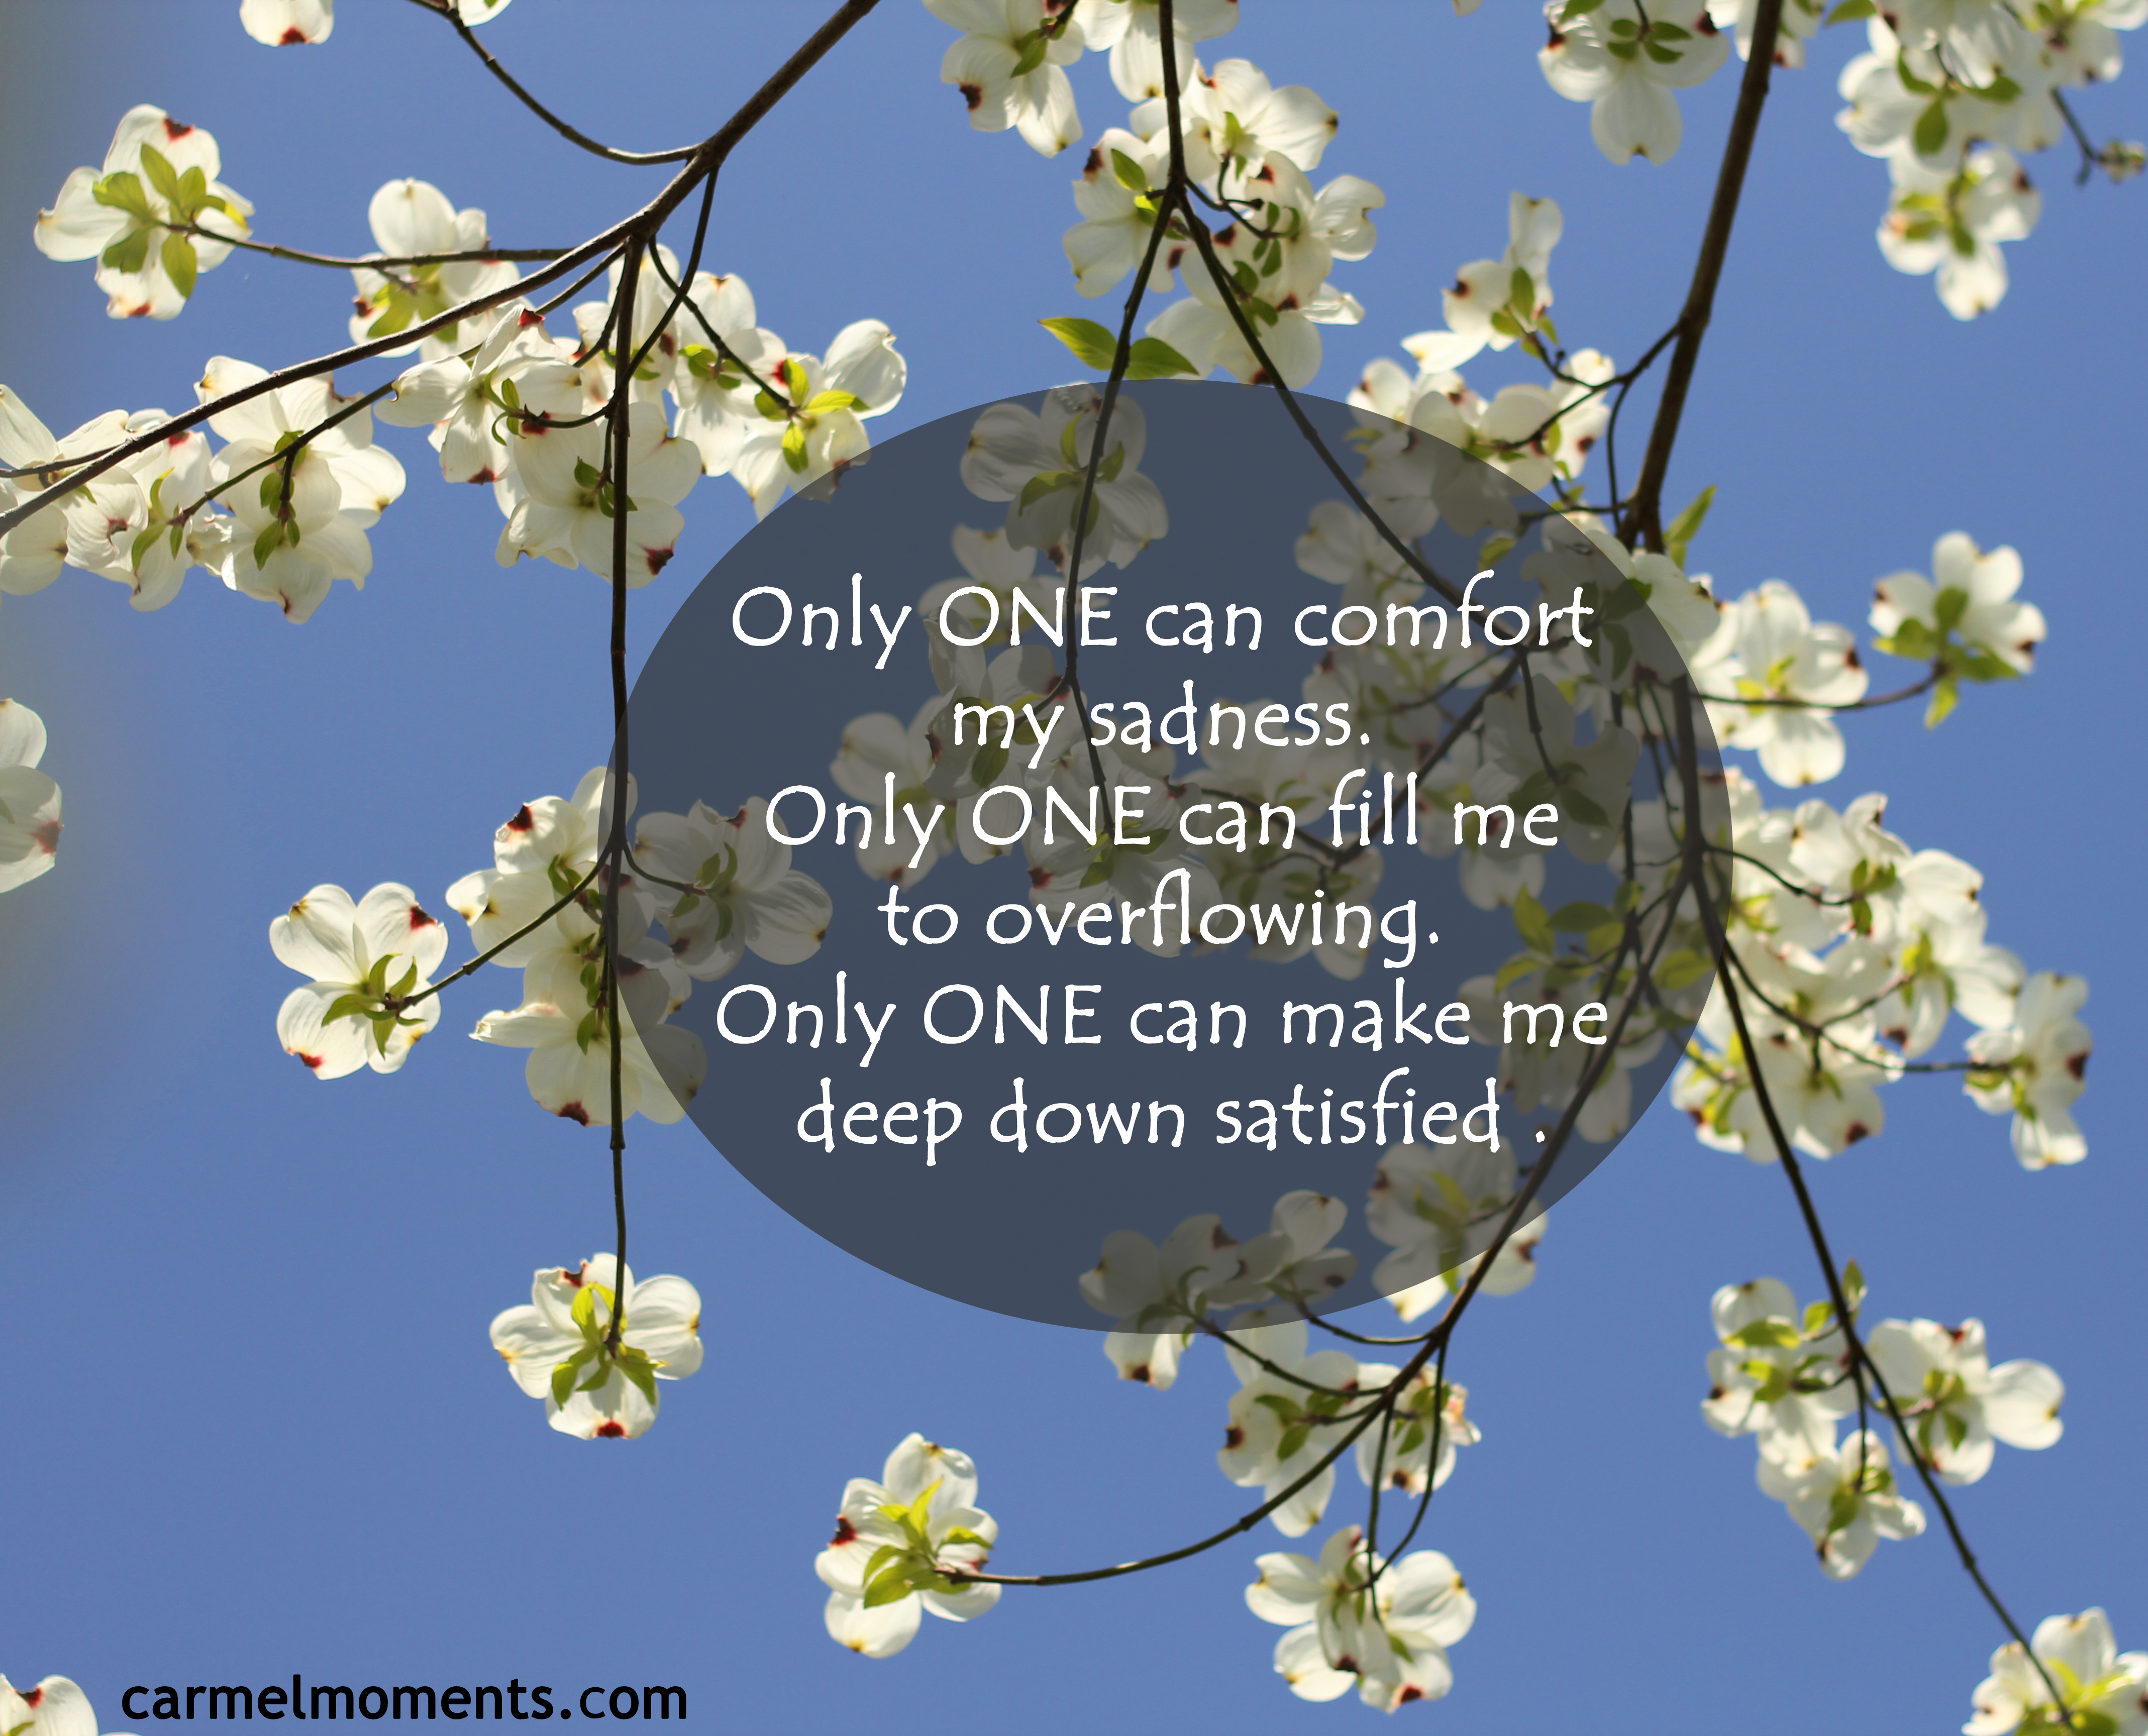 Only ONE can comfort my sadness. Only ONE can fill me to overflowing. Only ONE can make me deep down satisfied .